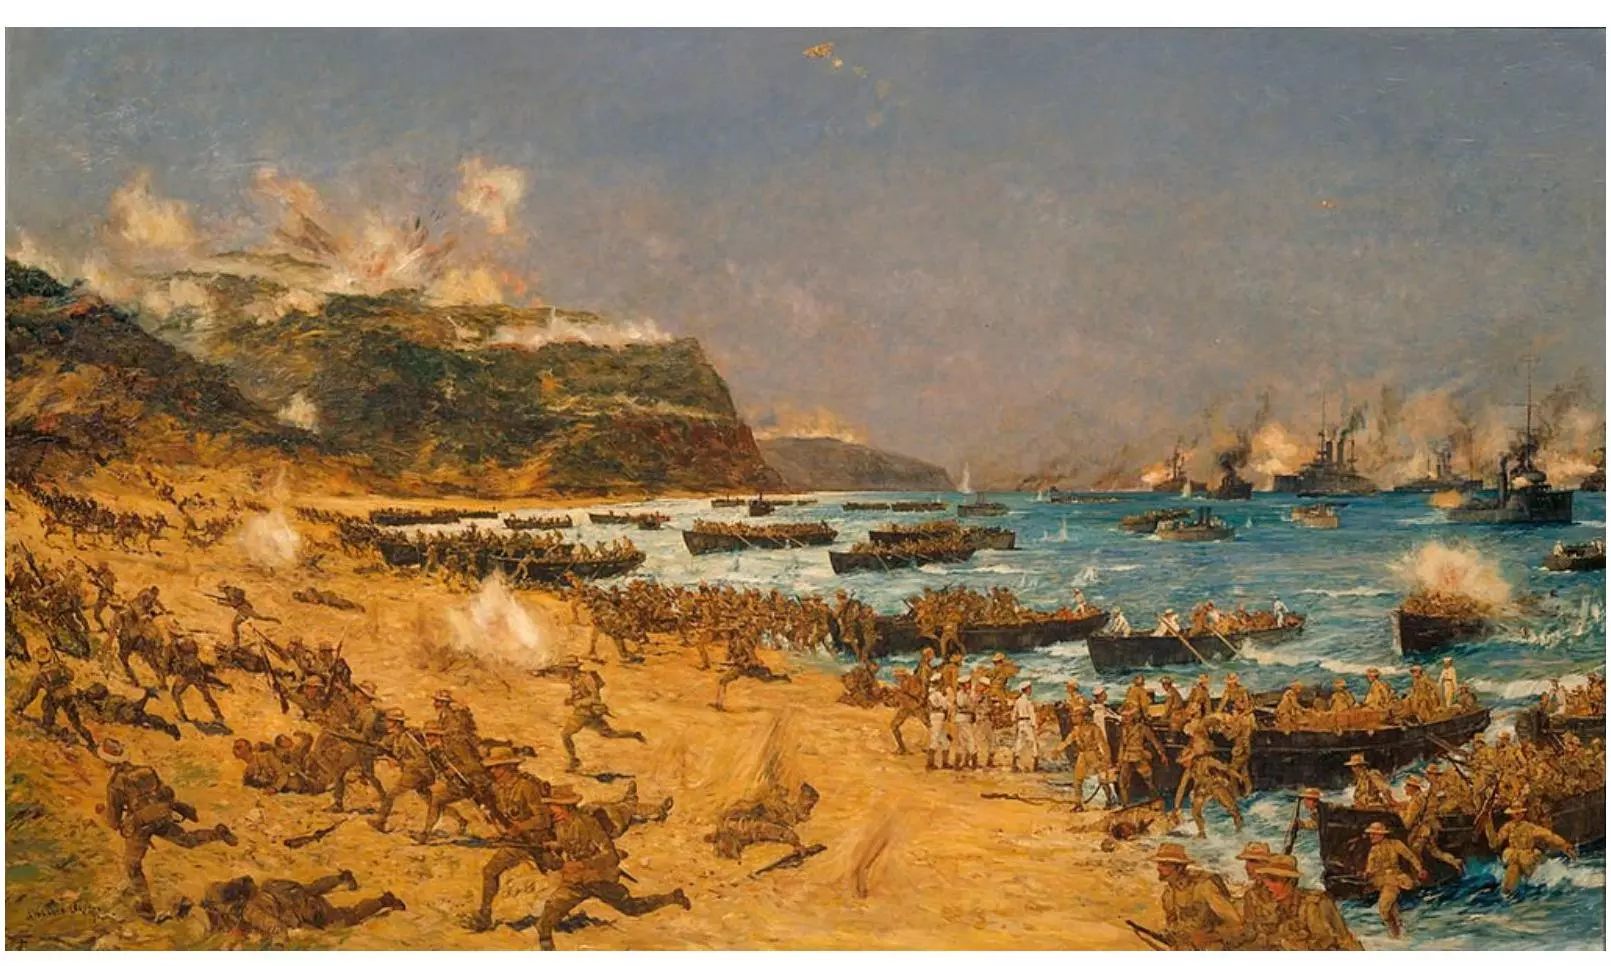 Travels in Gallipoli: A Tale of Forgotten Indian Bravehearts